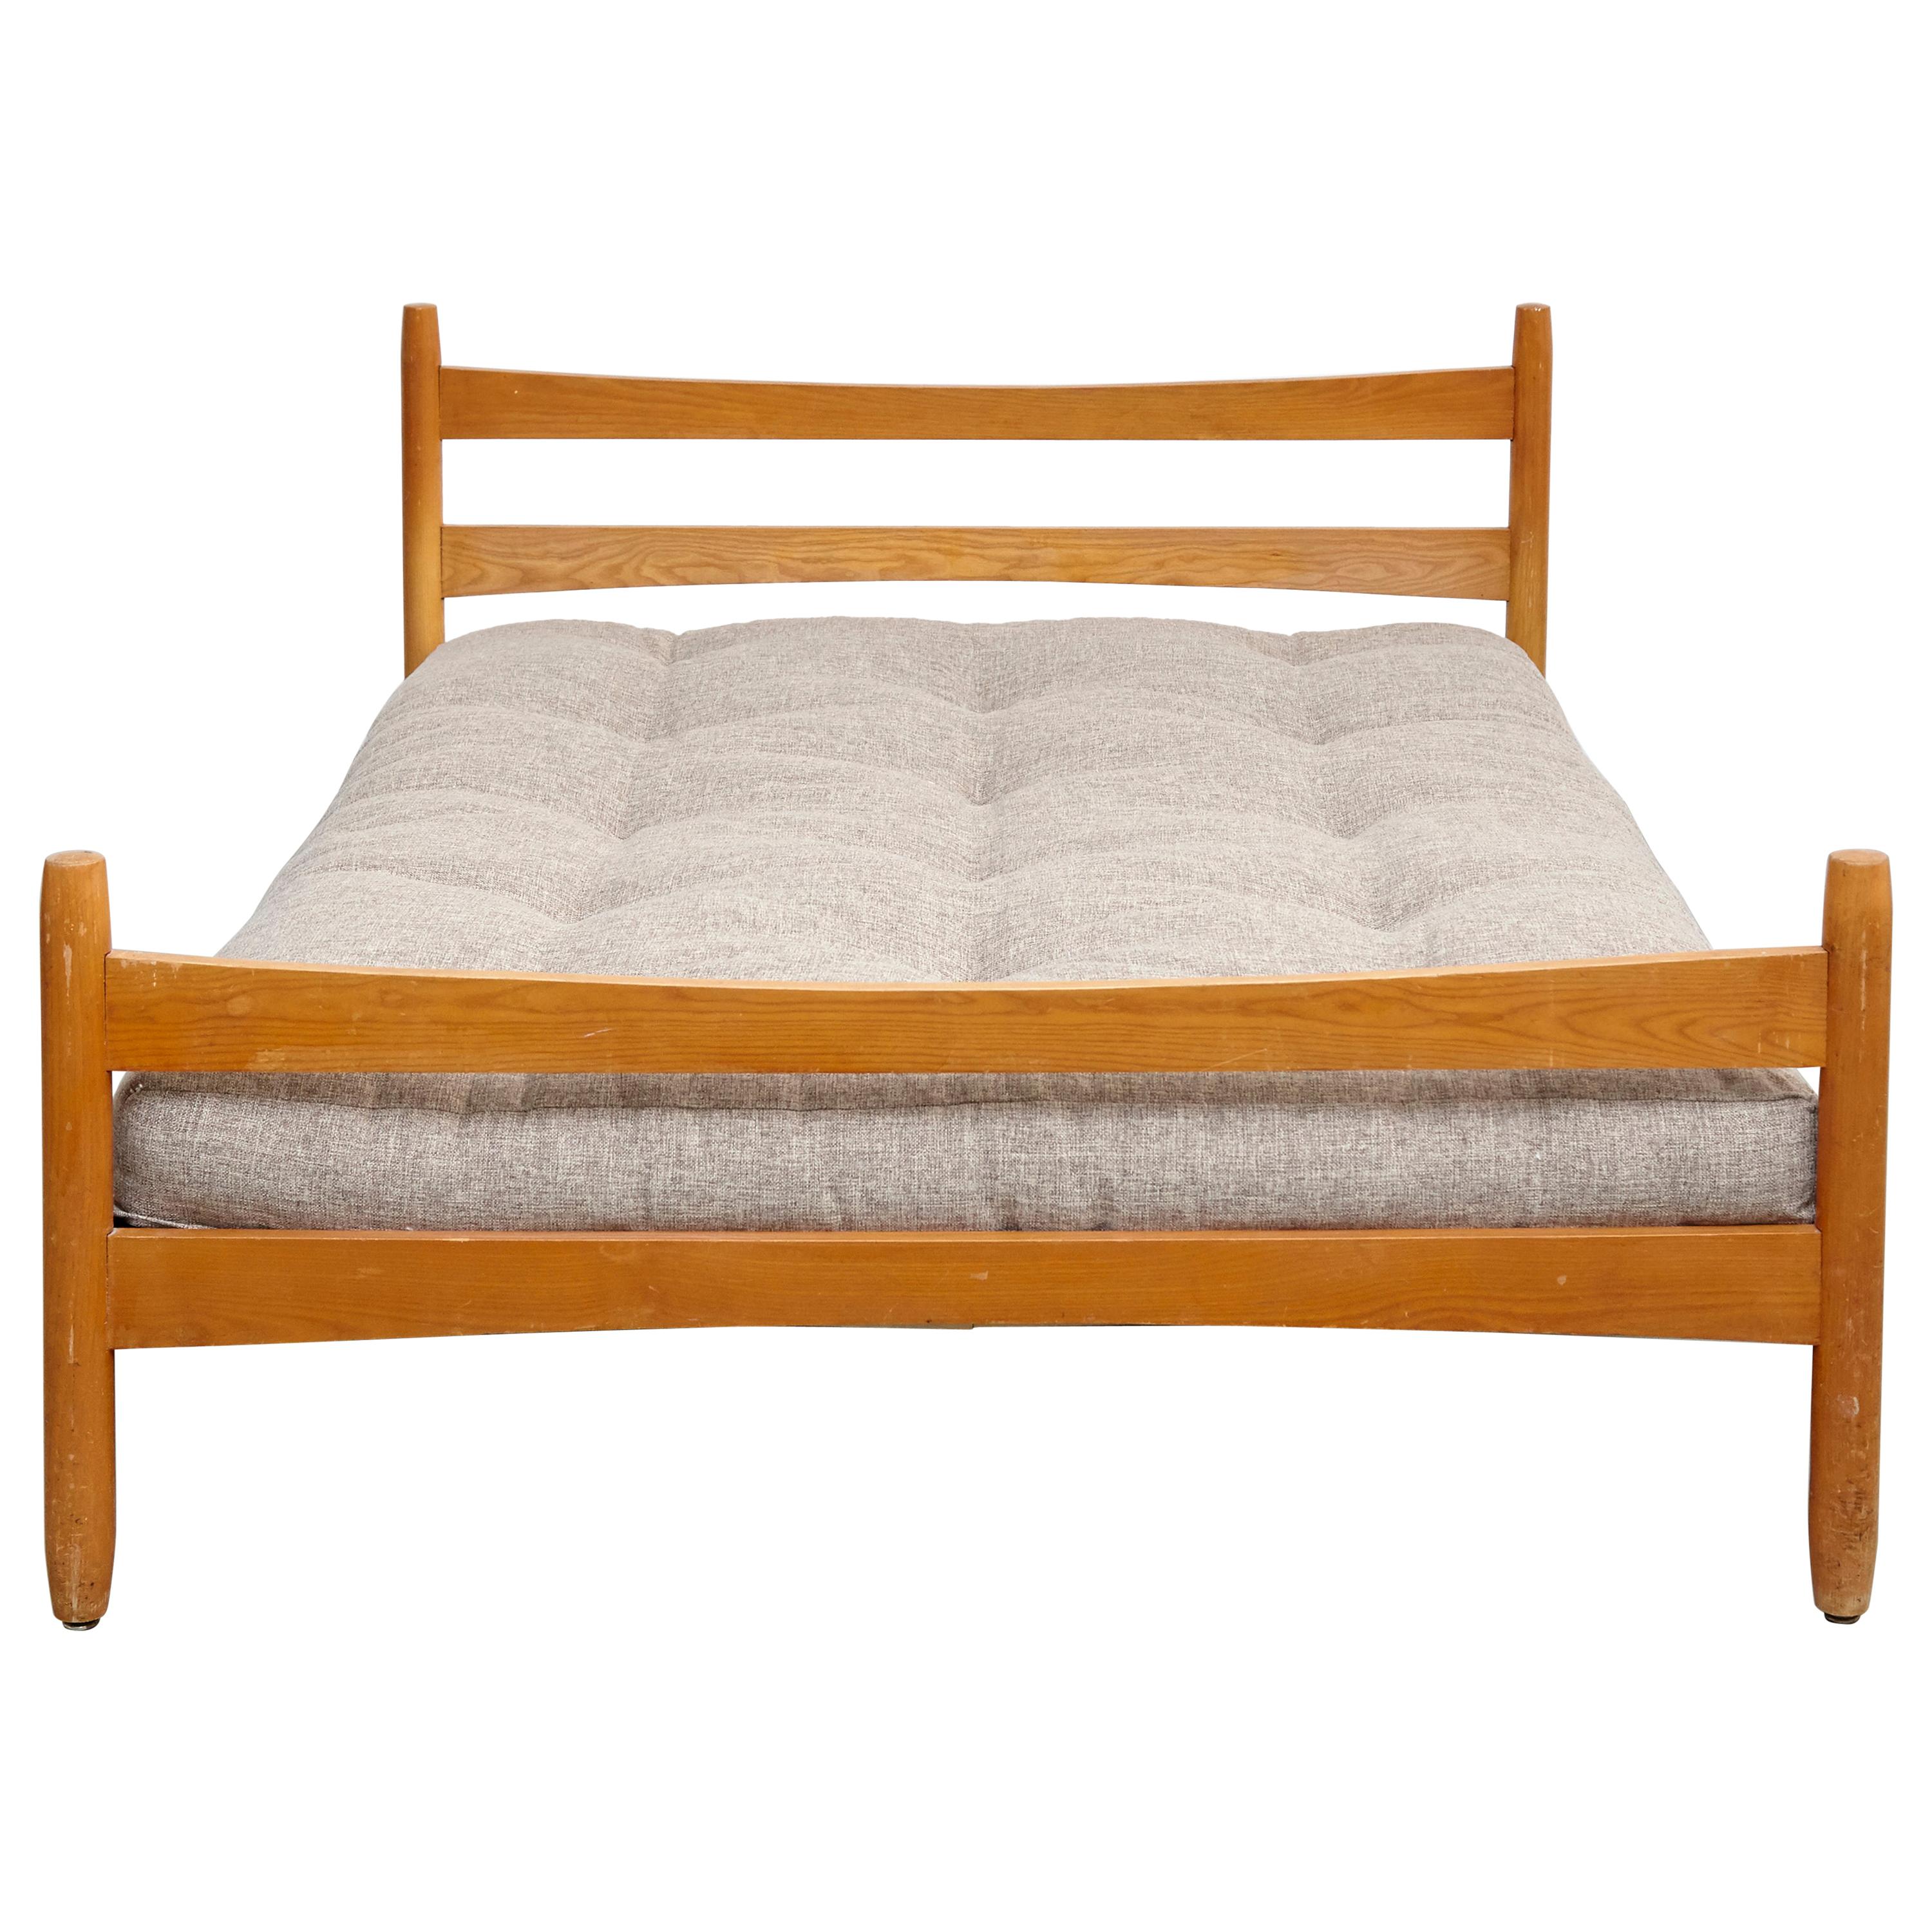 Bed designed by Charlotte Perriand for Meribel, circa 1960.
Manufactured in France.

Pinewood.

In good original condition, with minor wear consistent with age and use, preserving a beautiful patina.

Charlotte Perriand (1903-1999). She was